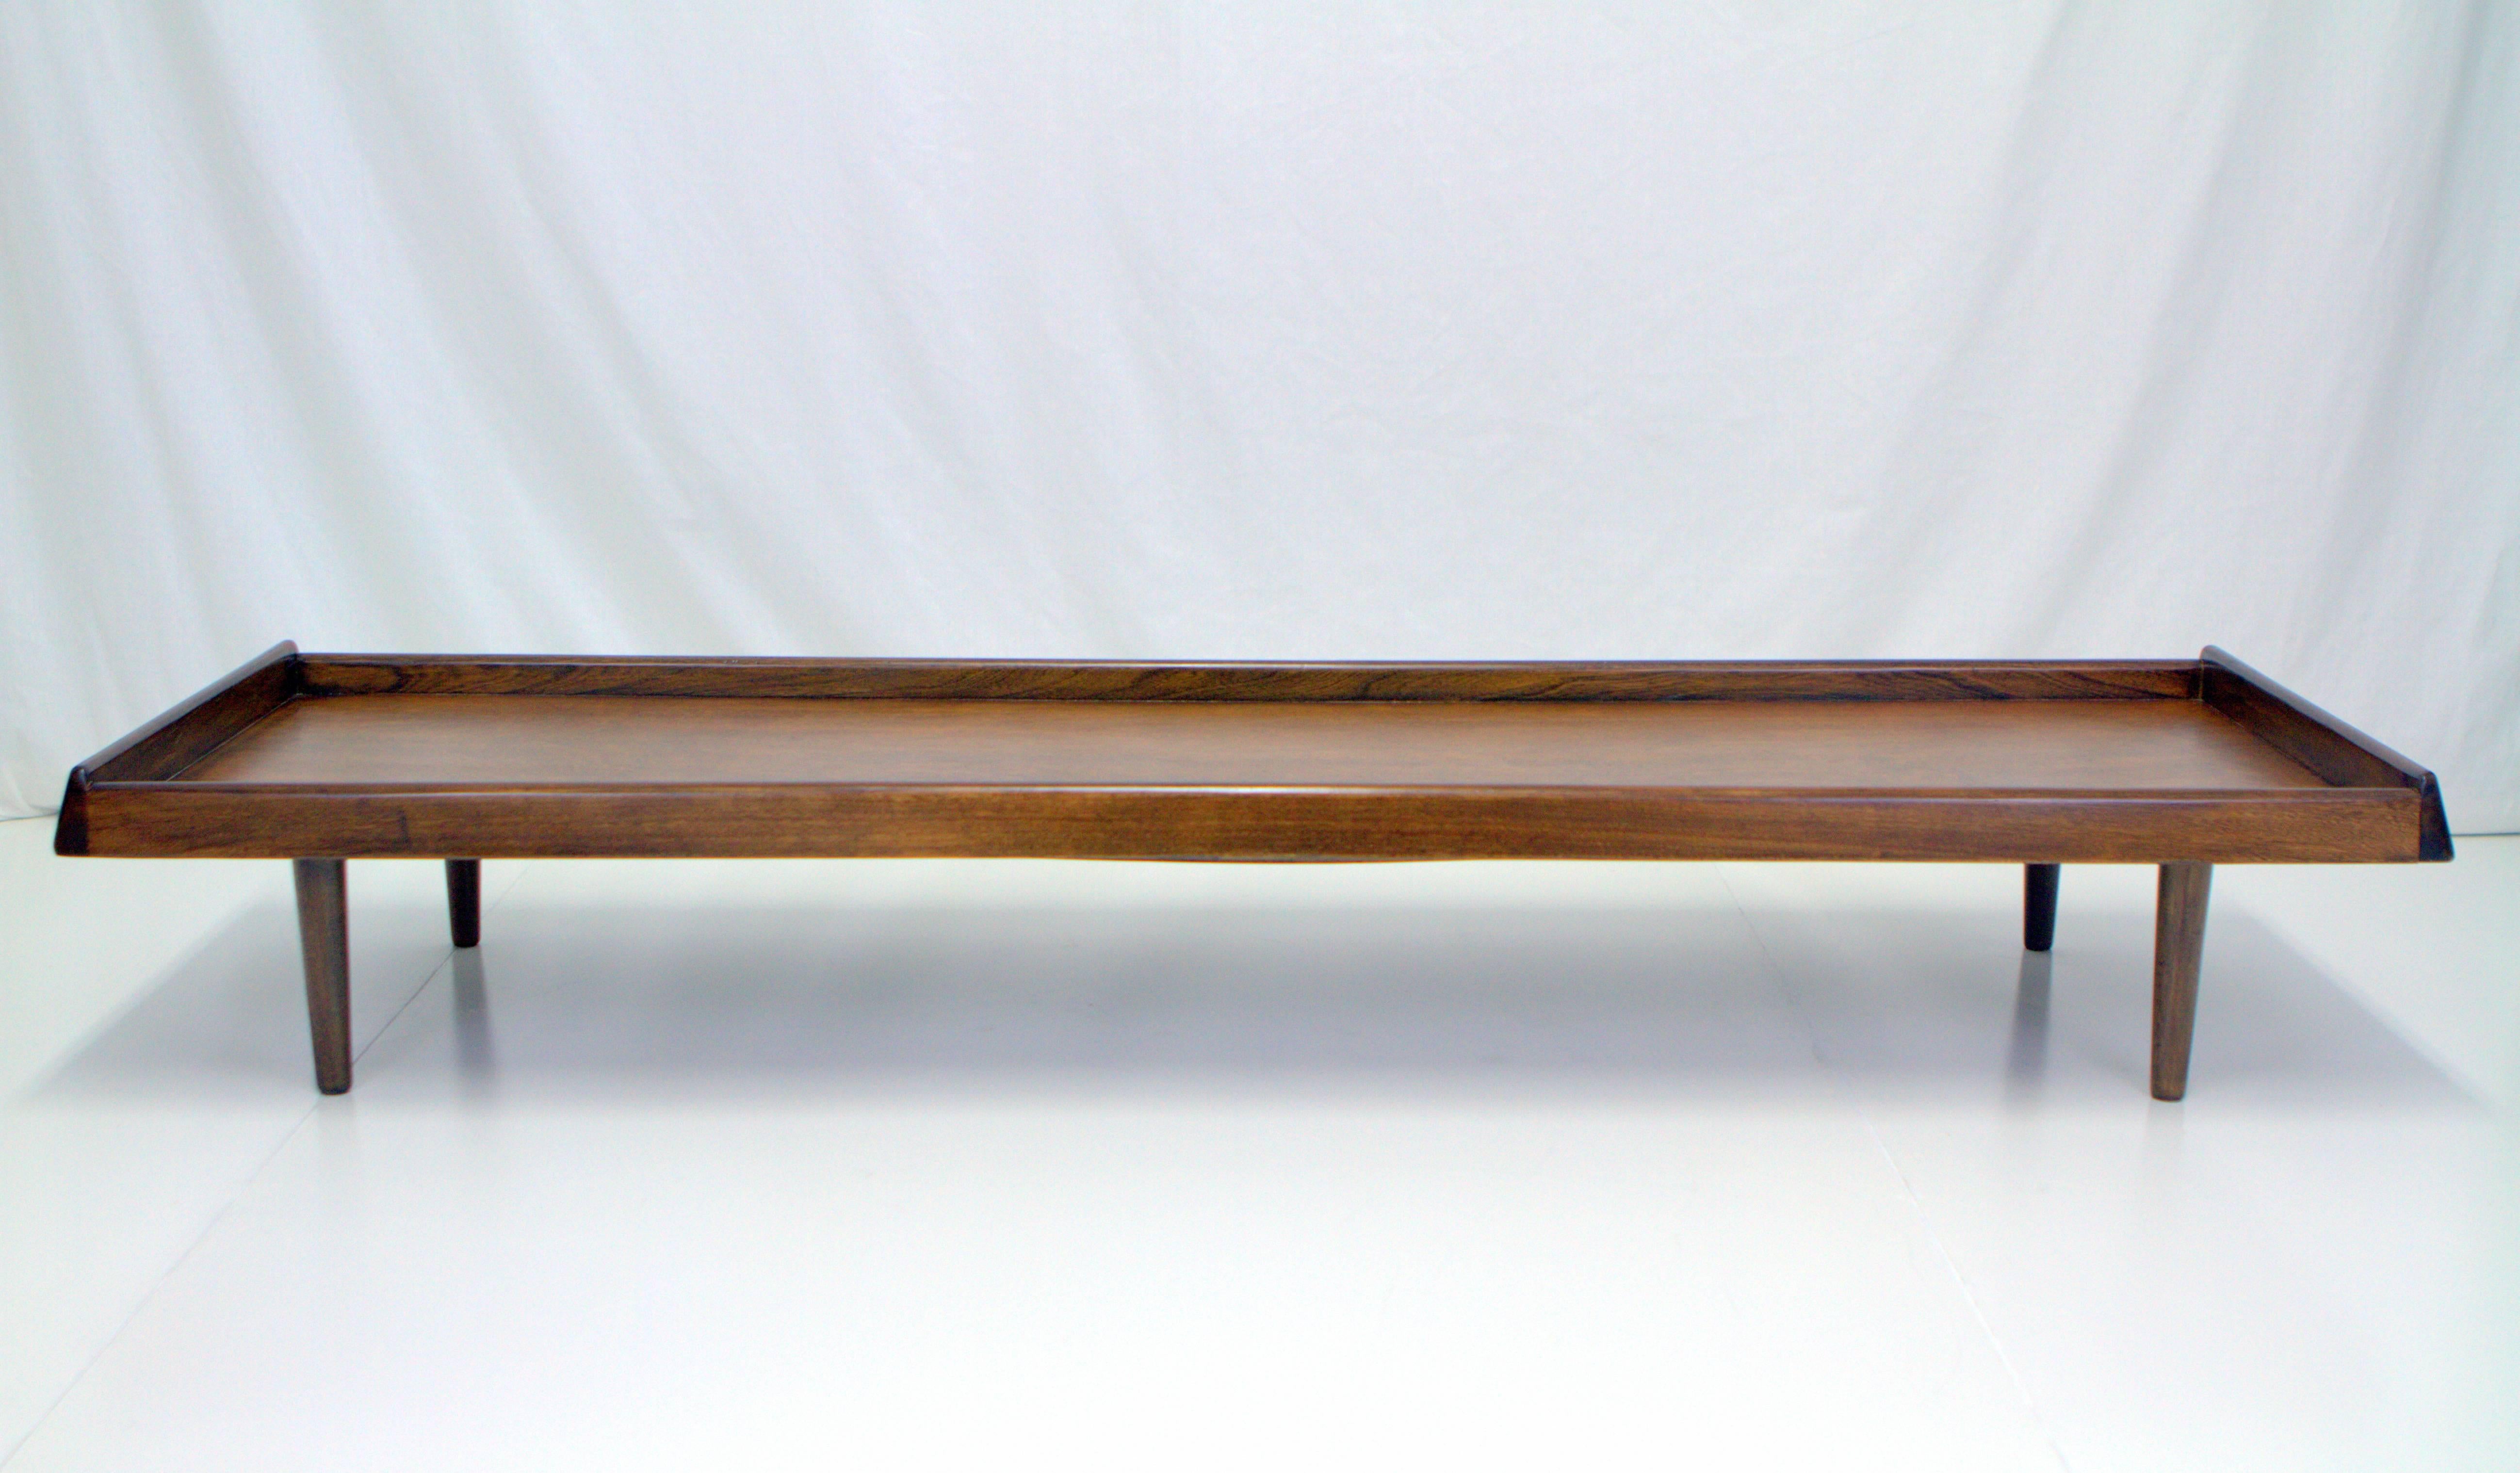 Mid-Century walnut cocktail table or bench. Very long and low with tapered sculptural sides and a recessed surface. Can be a bench or daybed with upholstered cushion. Solid construction with under mount support and screw on tapered legs.